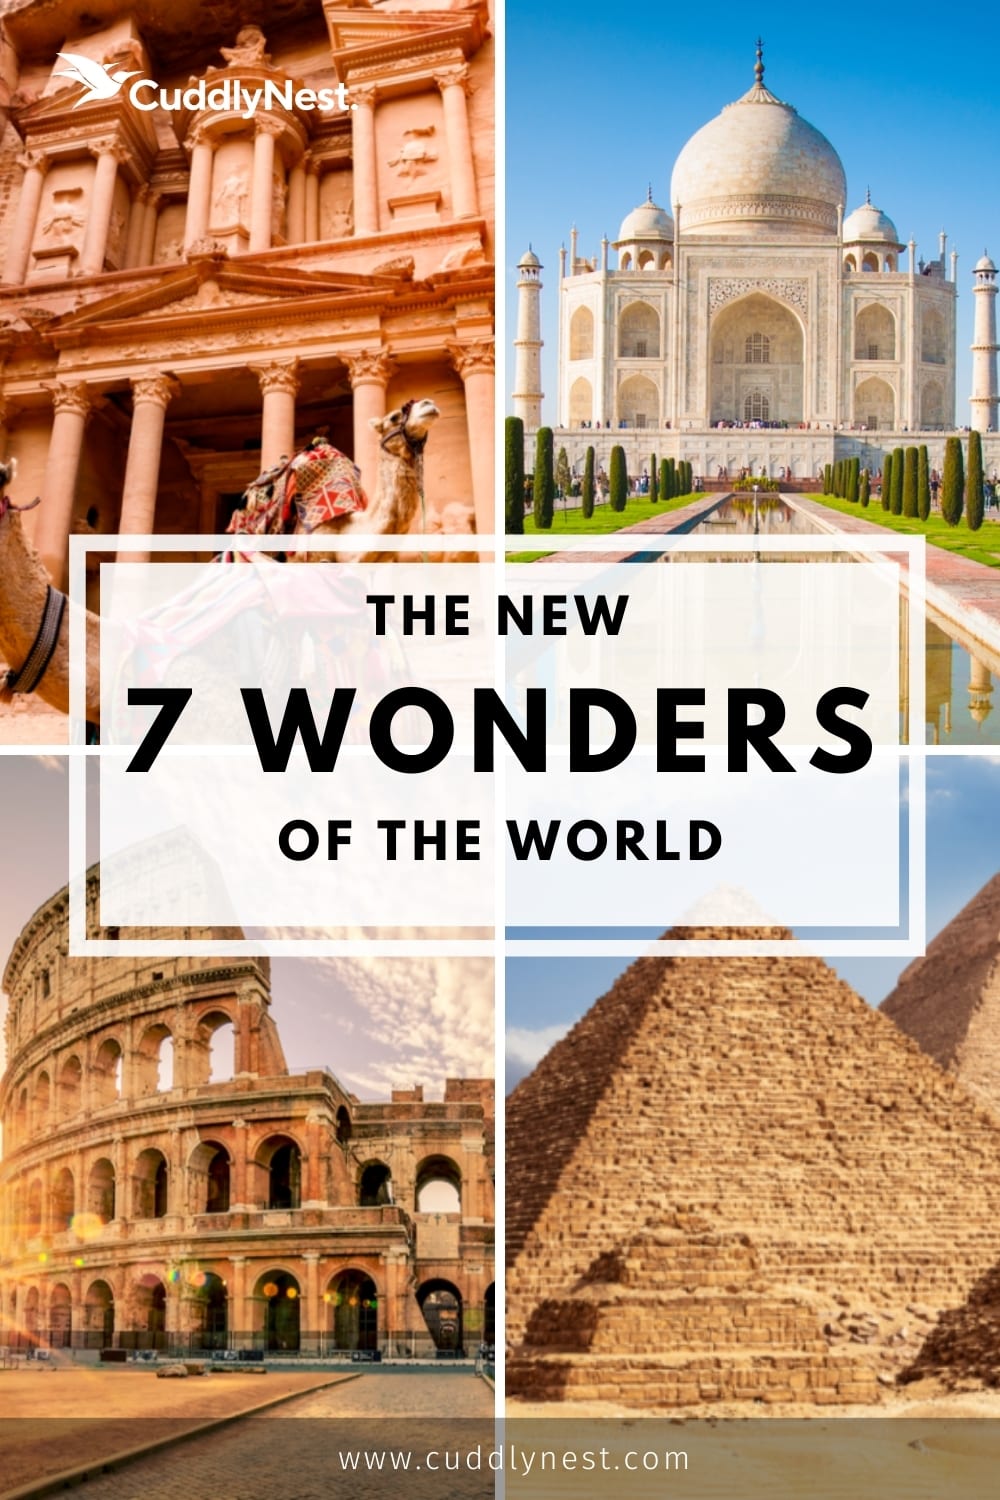 7-new-wonders-of-the-world-with-images-cuddlynest